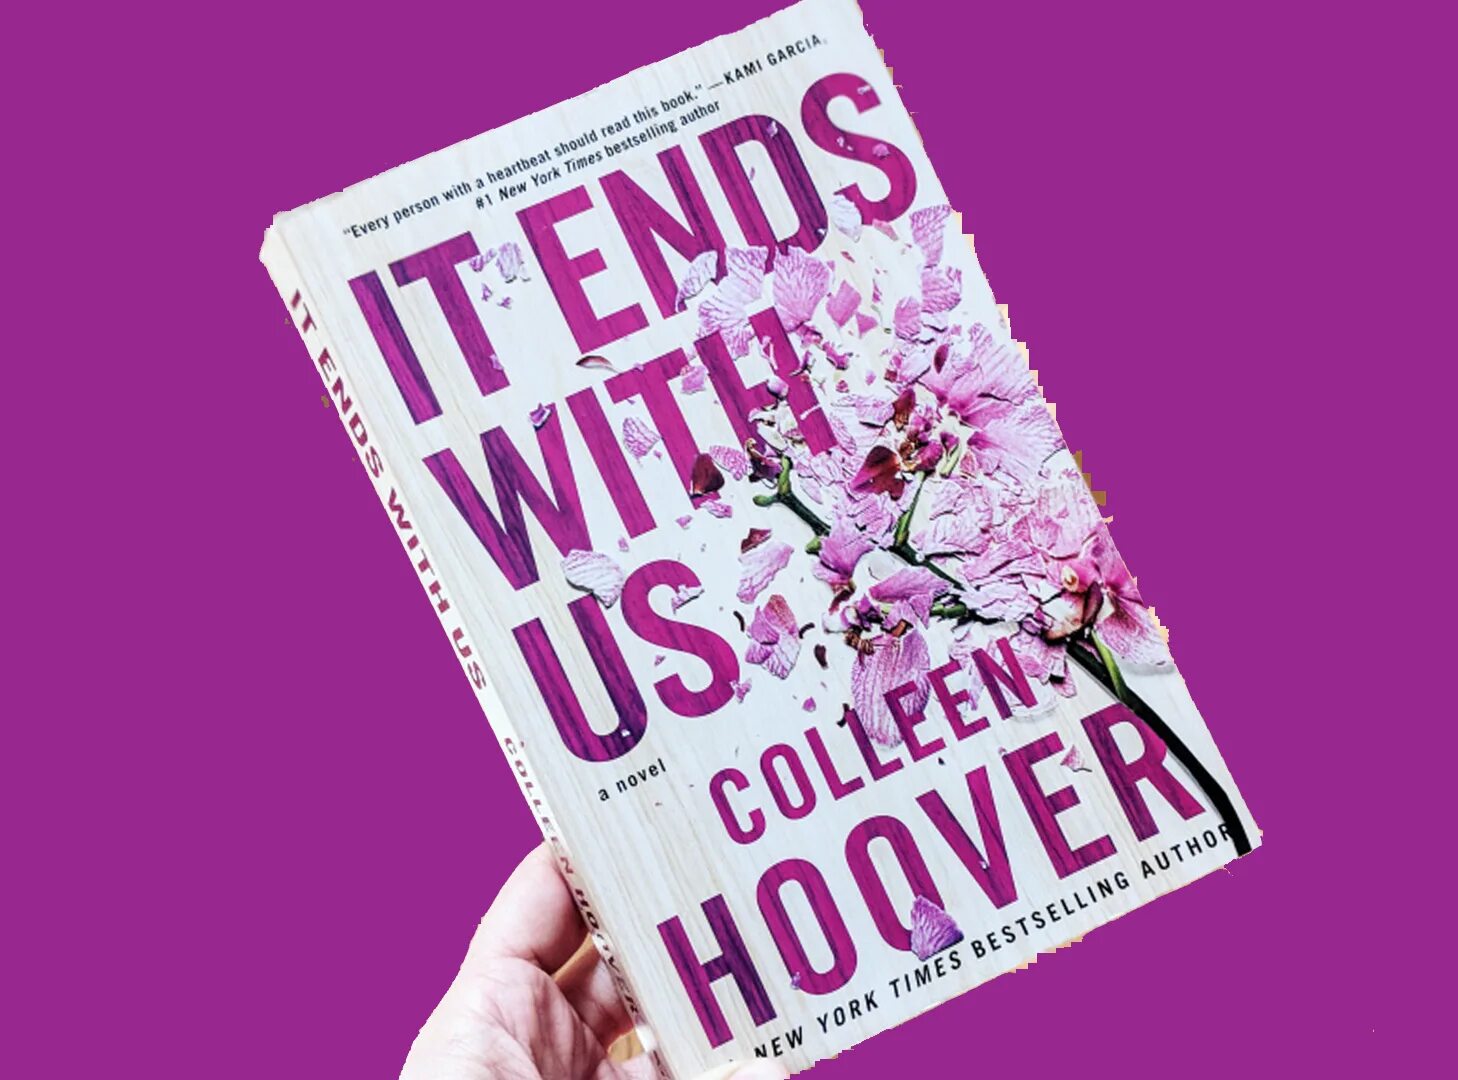 It ends with us Colleen Hoover книга. It ends with us Коллин Хувер. It ends with us книга. It ends with us Коллин Хувер книга.